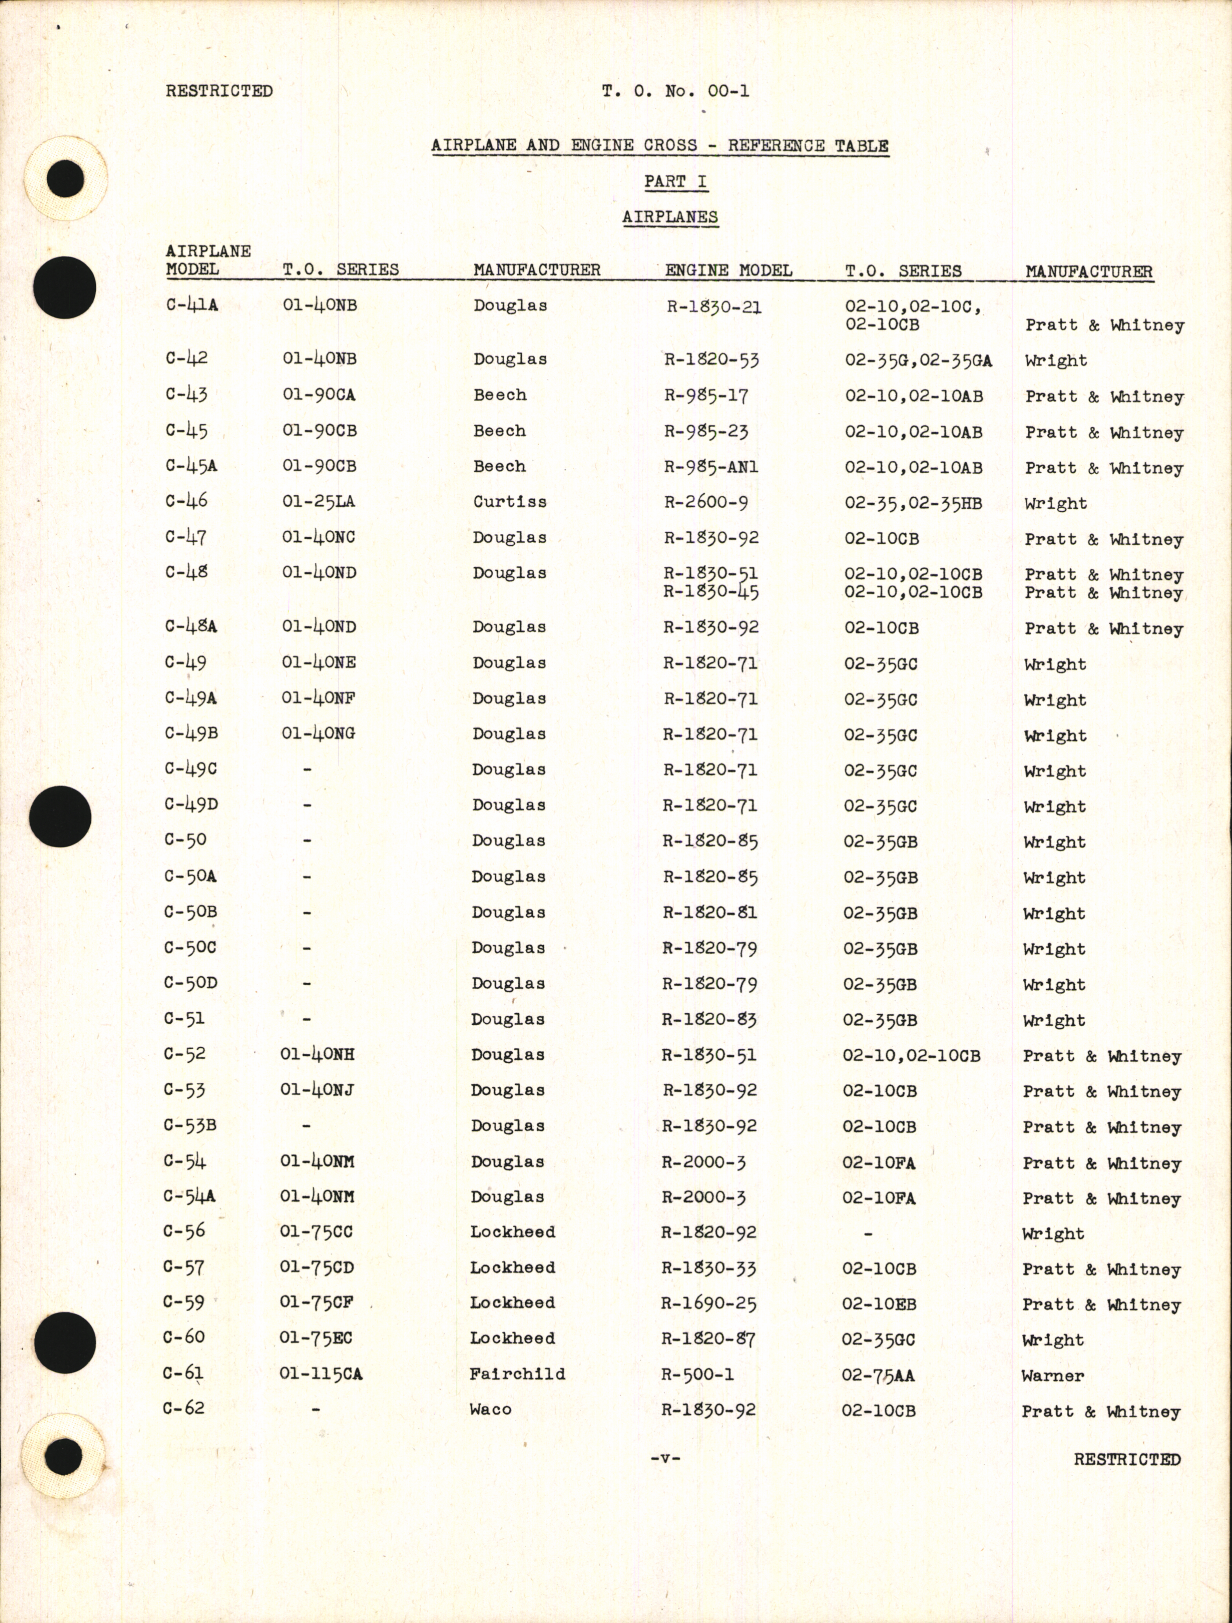 Sample page 5 from AirCorps Library document: Airplane and Engine Cross-Reference Table Part I